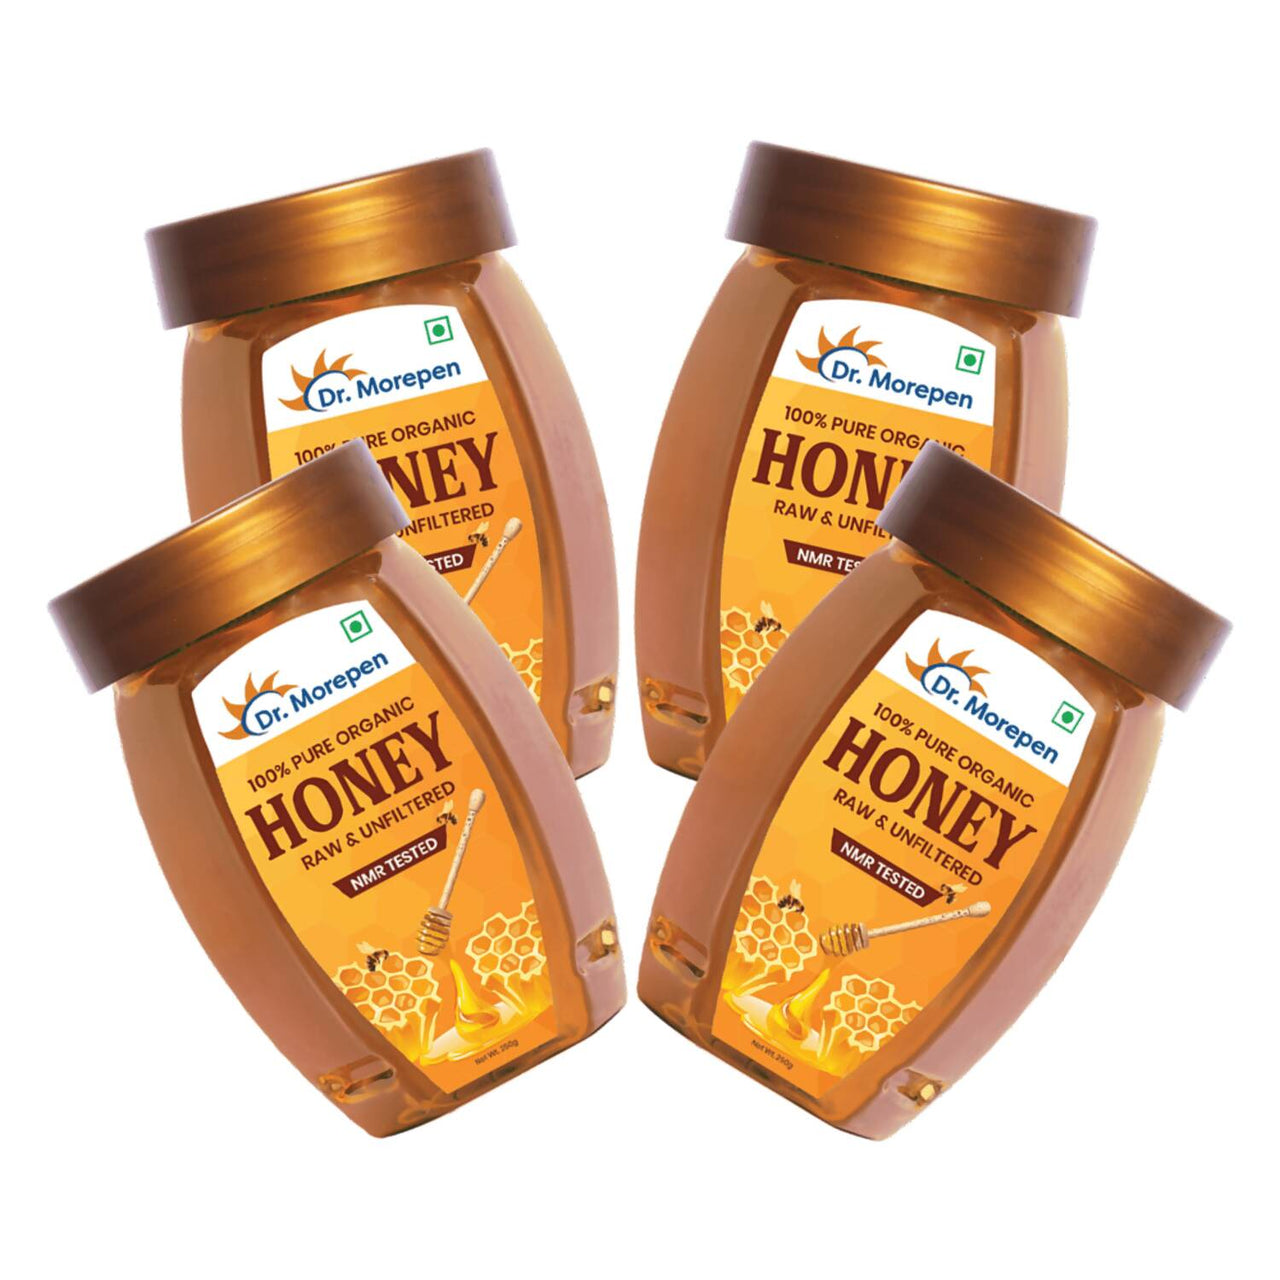 Dr. Morepen 100% Pure Organic Honey NMR Tested - Distacart